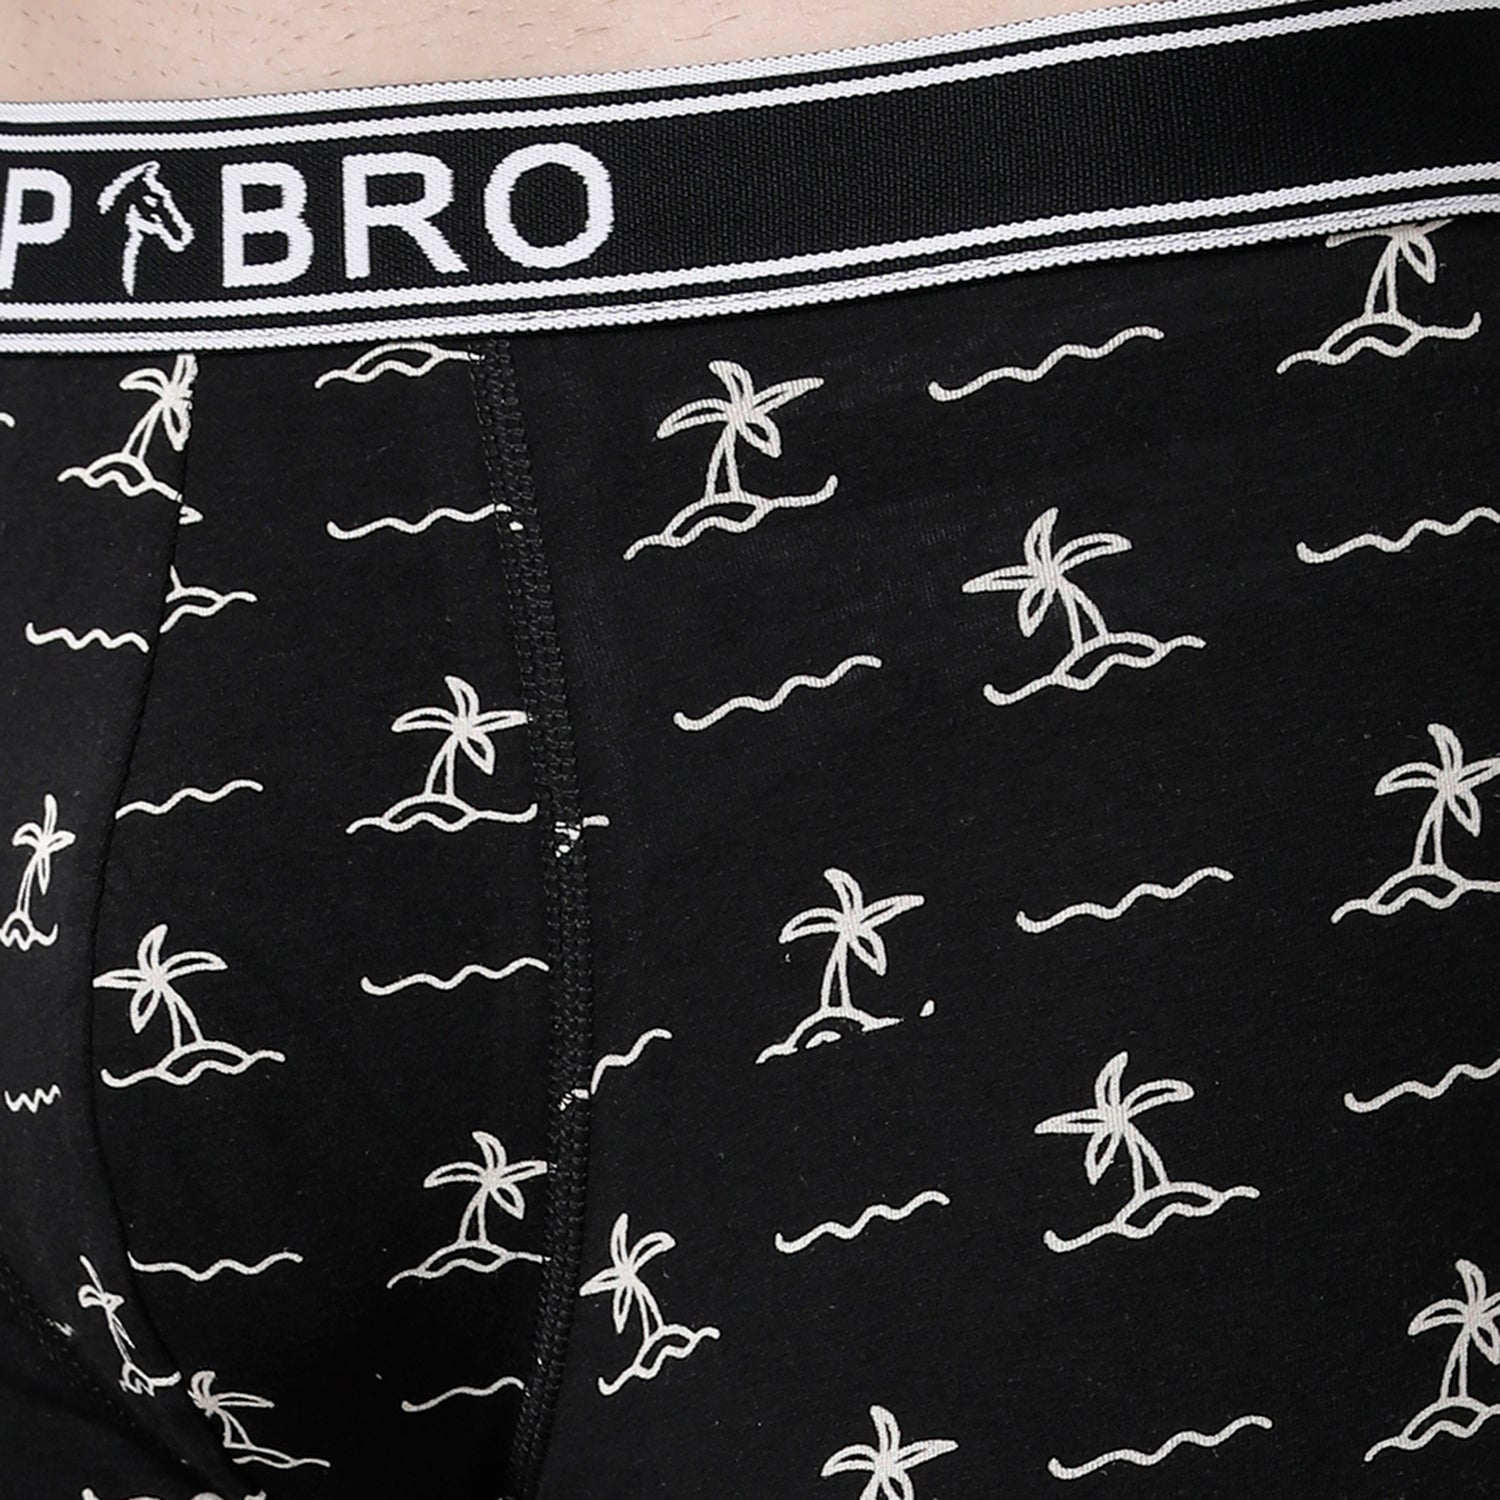 CP BRO Men's Printed Trunks with Exposed Waistband - Black Print